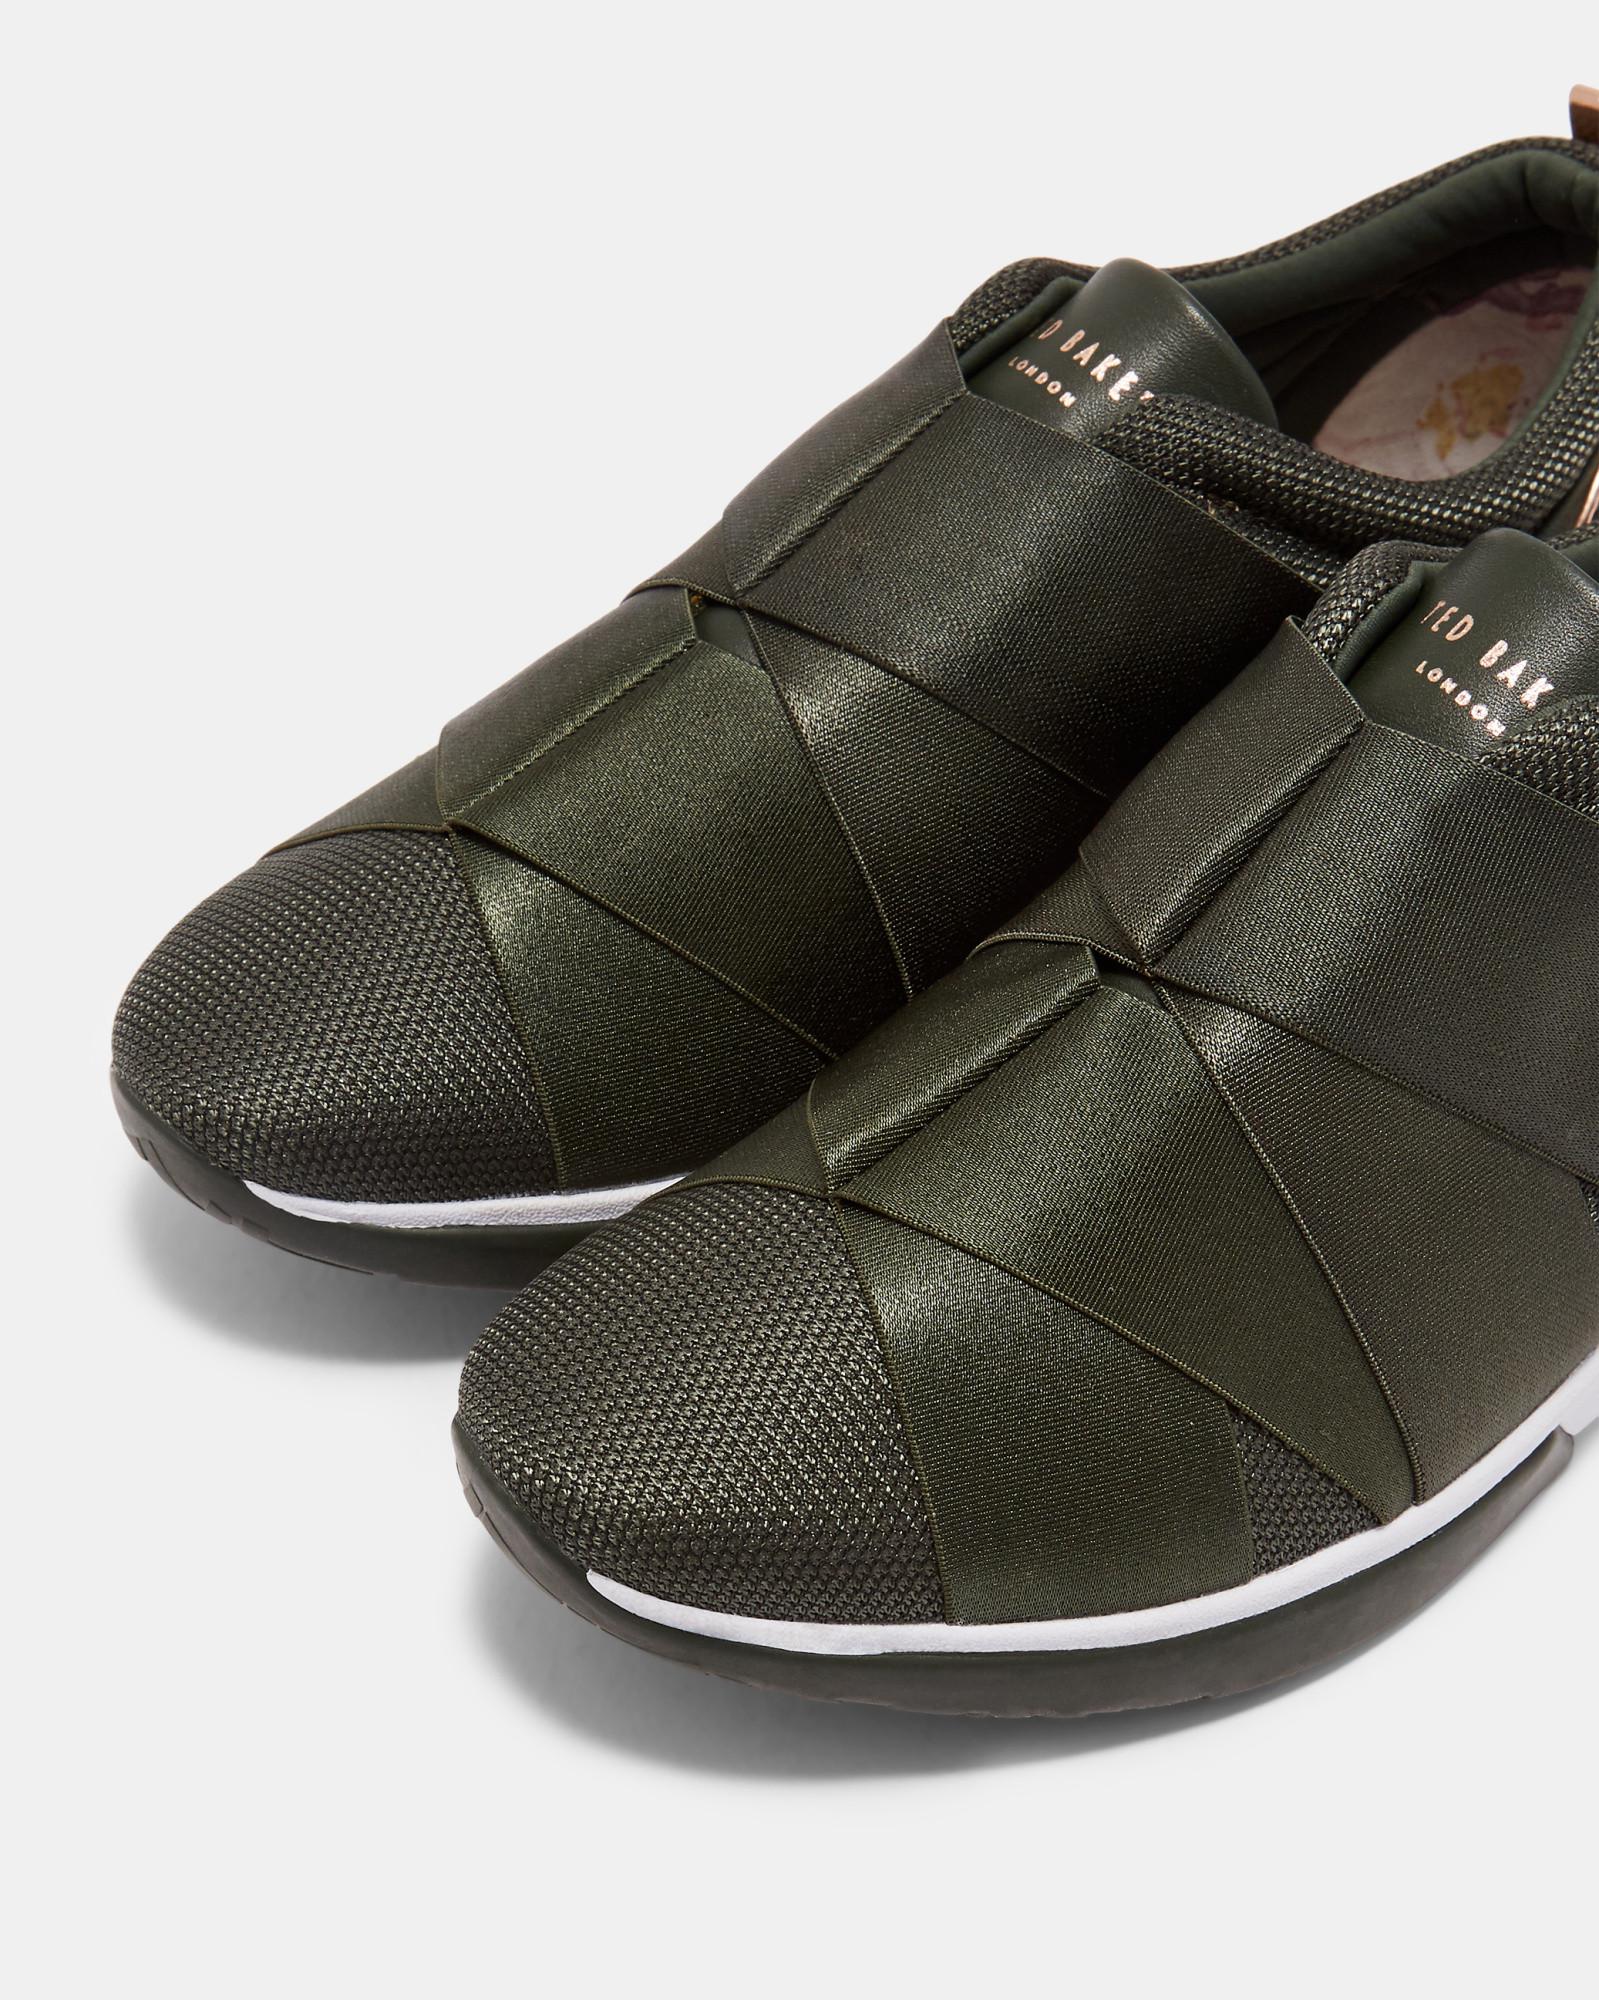 Ted Baker Synthetic Queanem Slip On Trainers in Khaki (Green) - Lyst